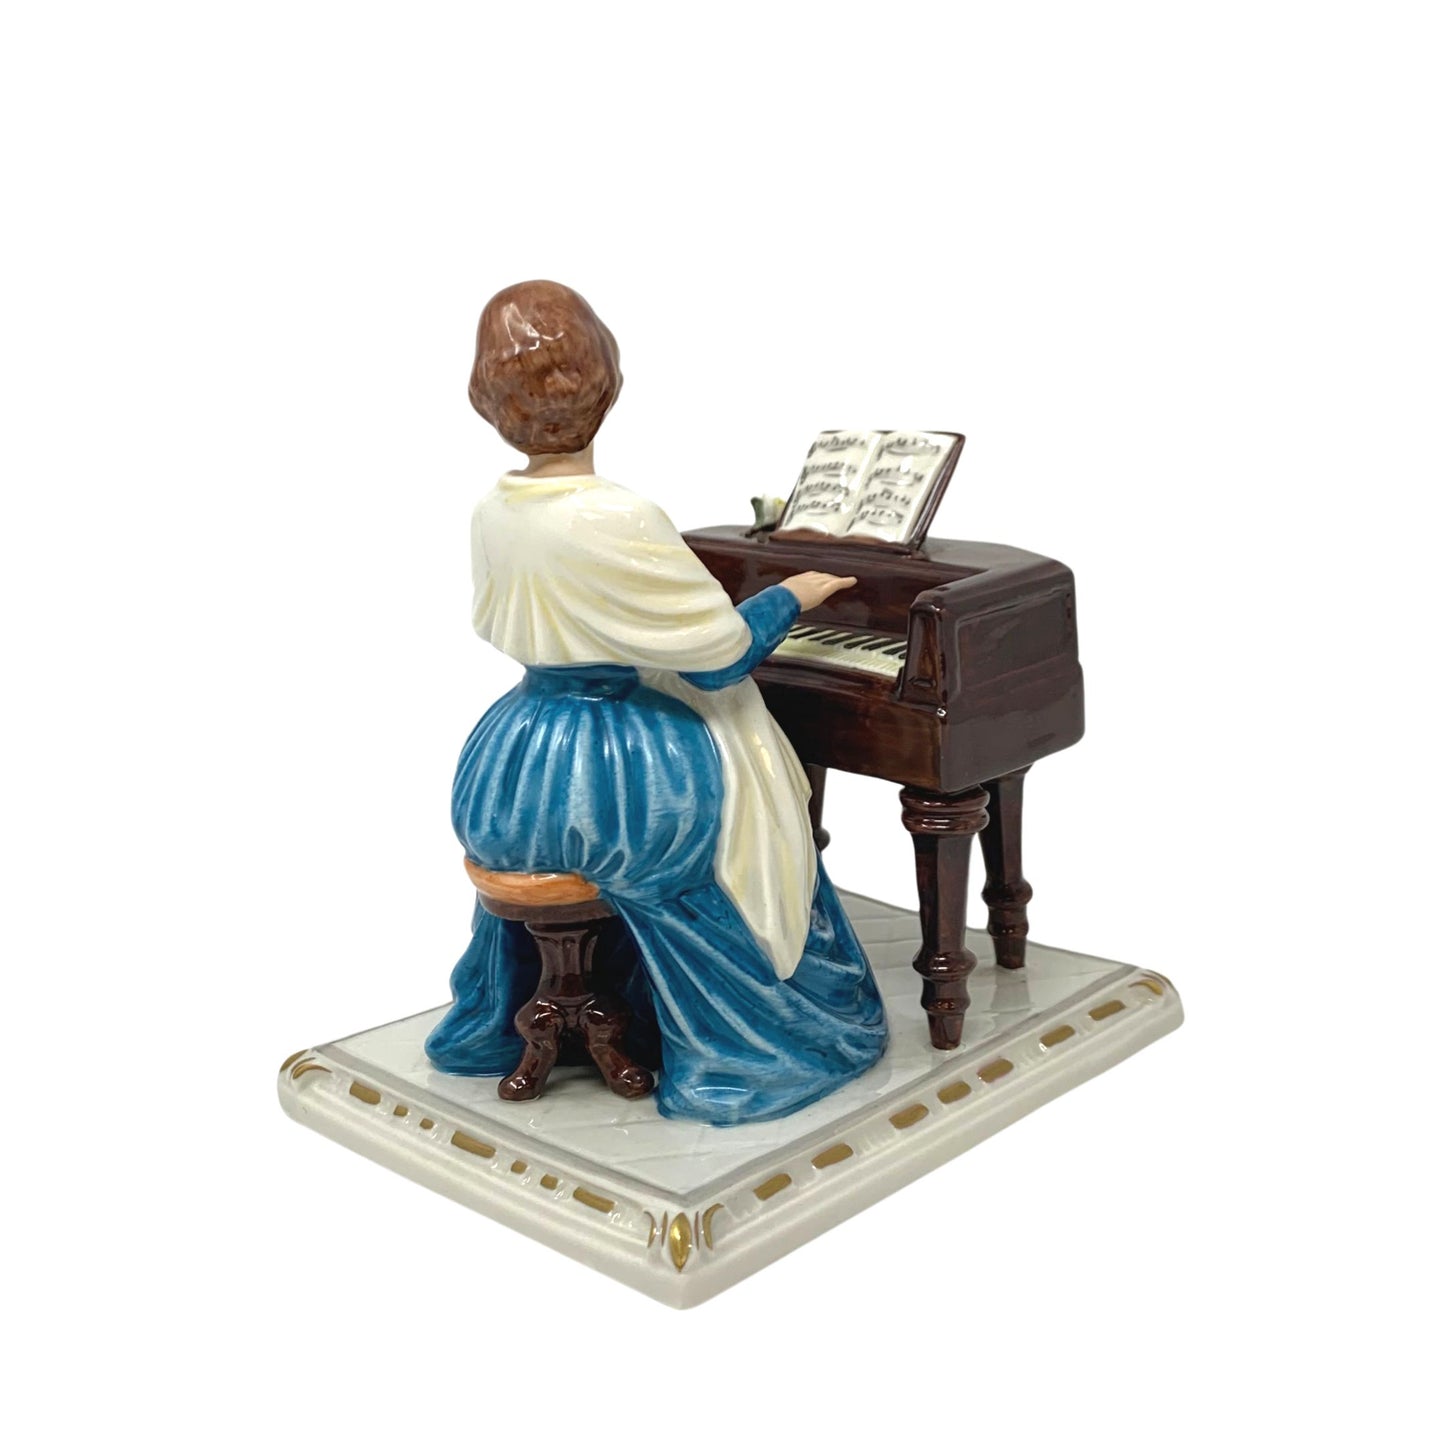 Dresden Style Sandizell Hoffner "Woman at Piano"